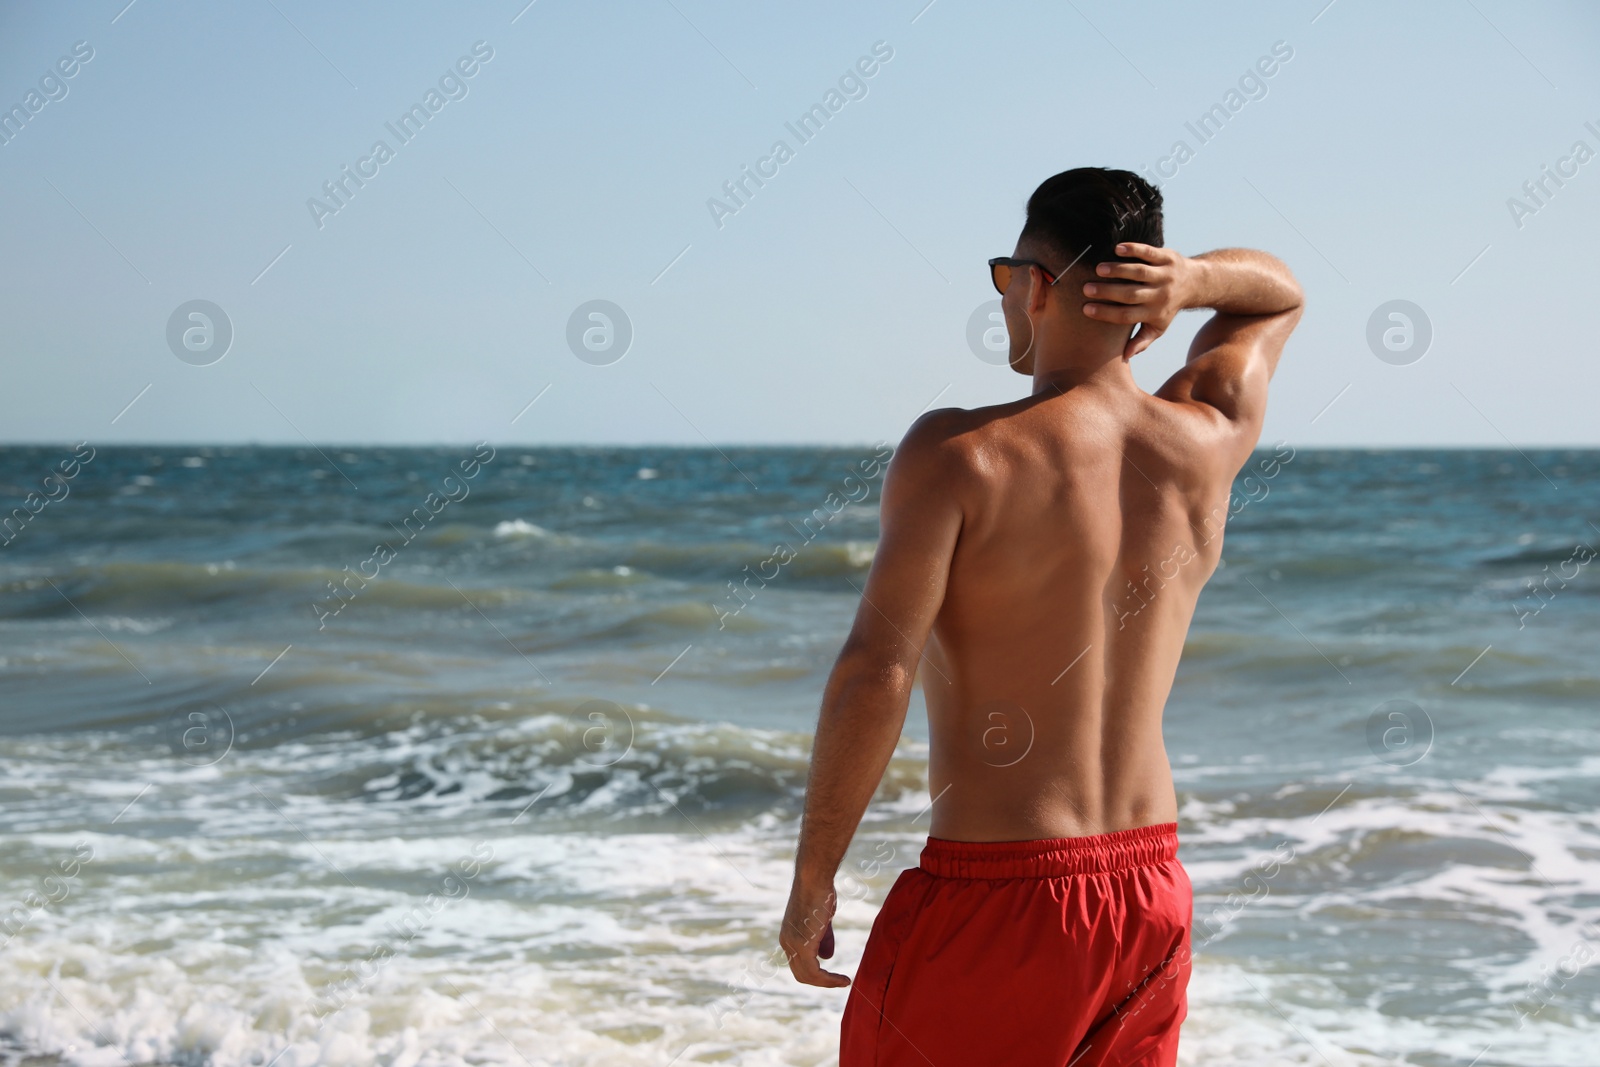 Photo of Man with attractive body on beach. Space for text